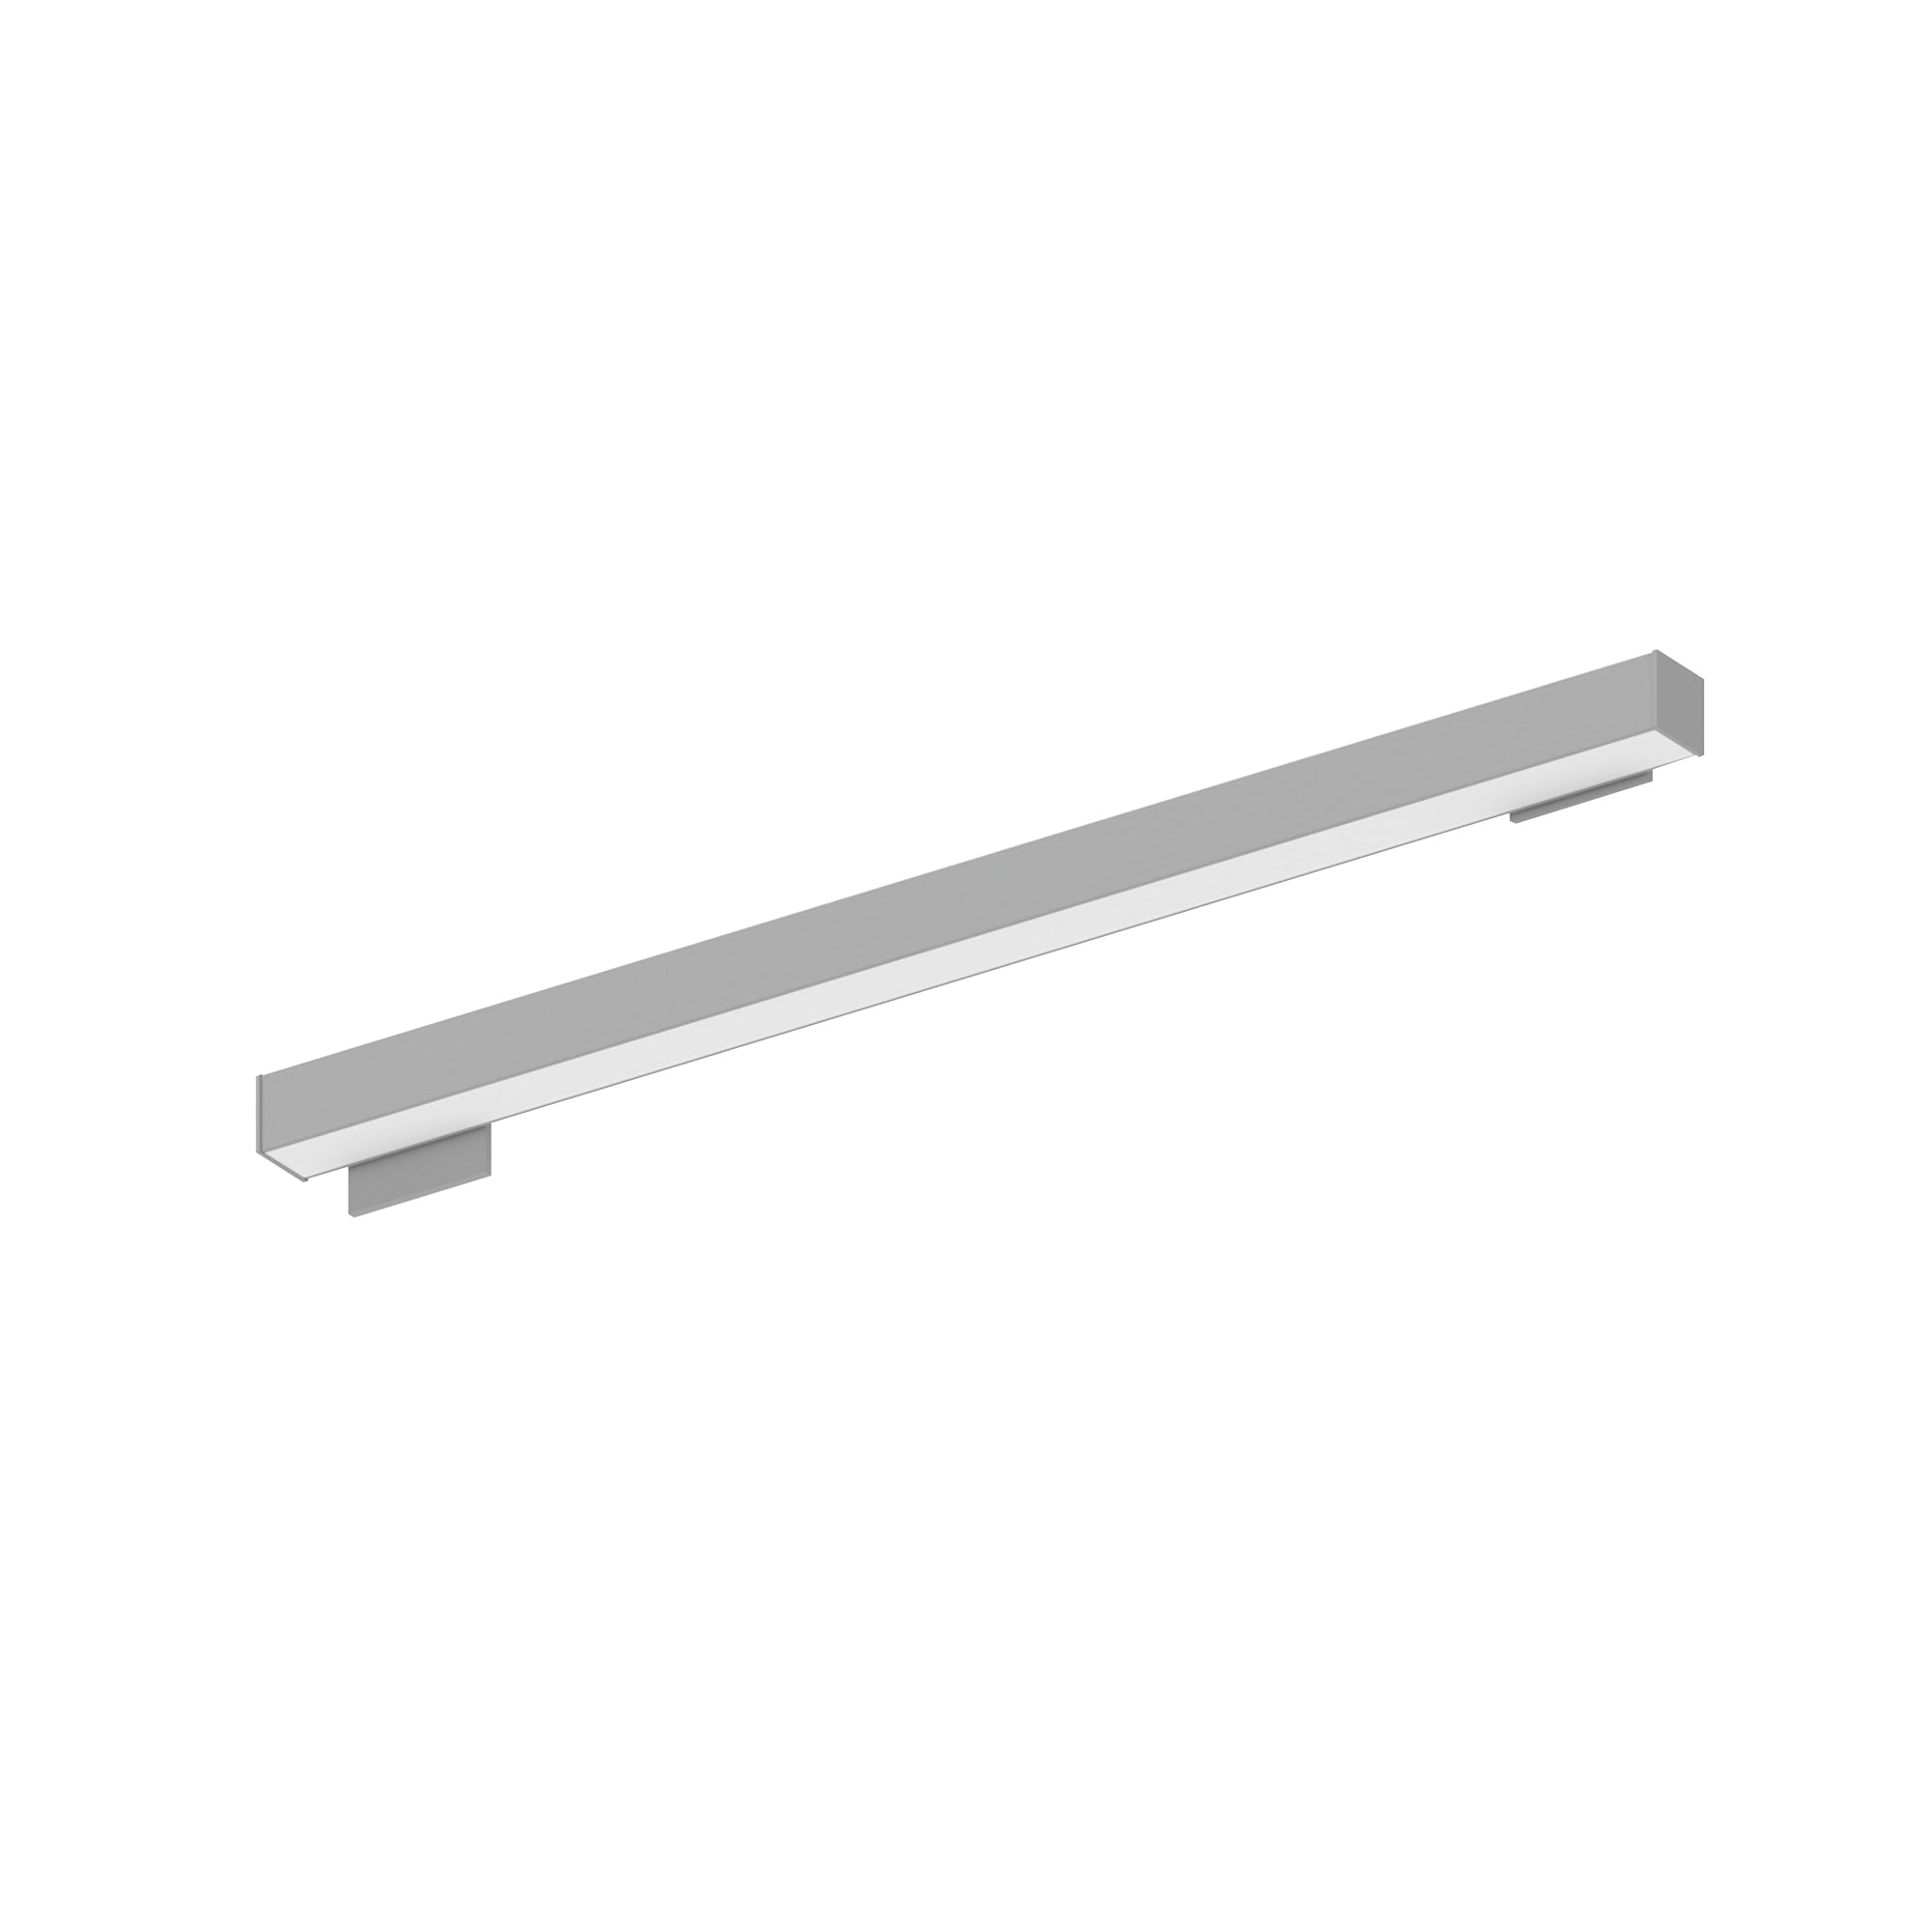 Nora Lighting NWLIN-41030A/L4P-R2 - Linear - 4' L-Line LED Wall Mount Linear, 4200lm / 3000K, 4 Inchx4 Inch Left Plate & 2 Inchx4 Inch Right Plate, Left Power Feed, Aluminum Finish